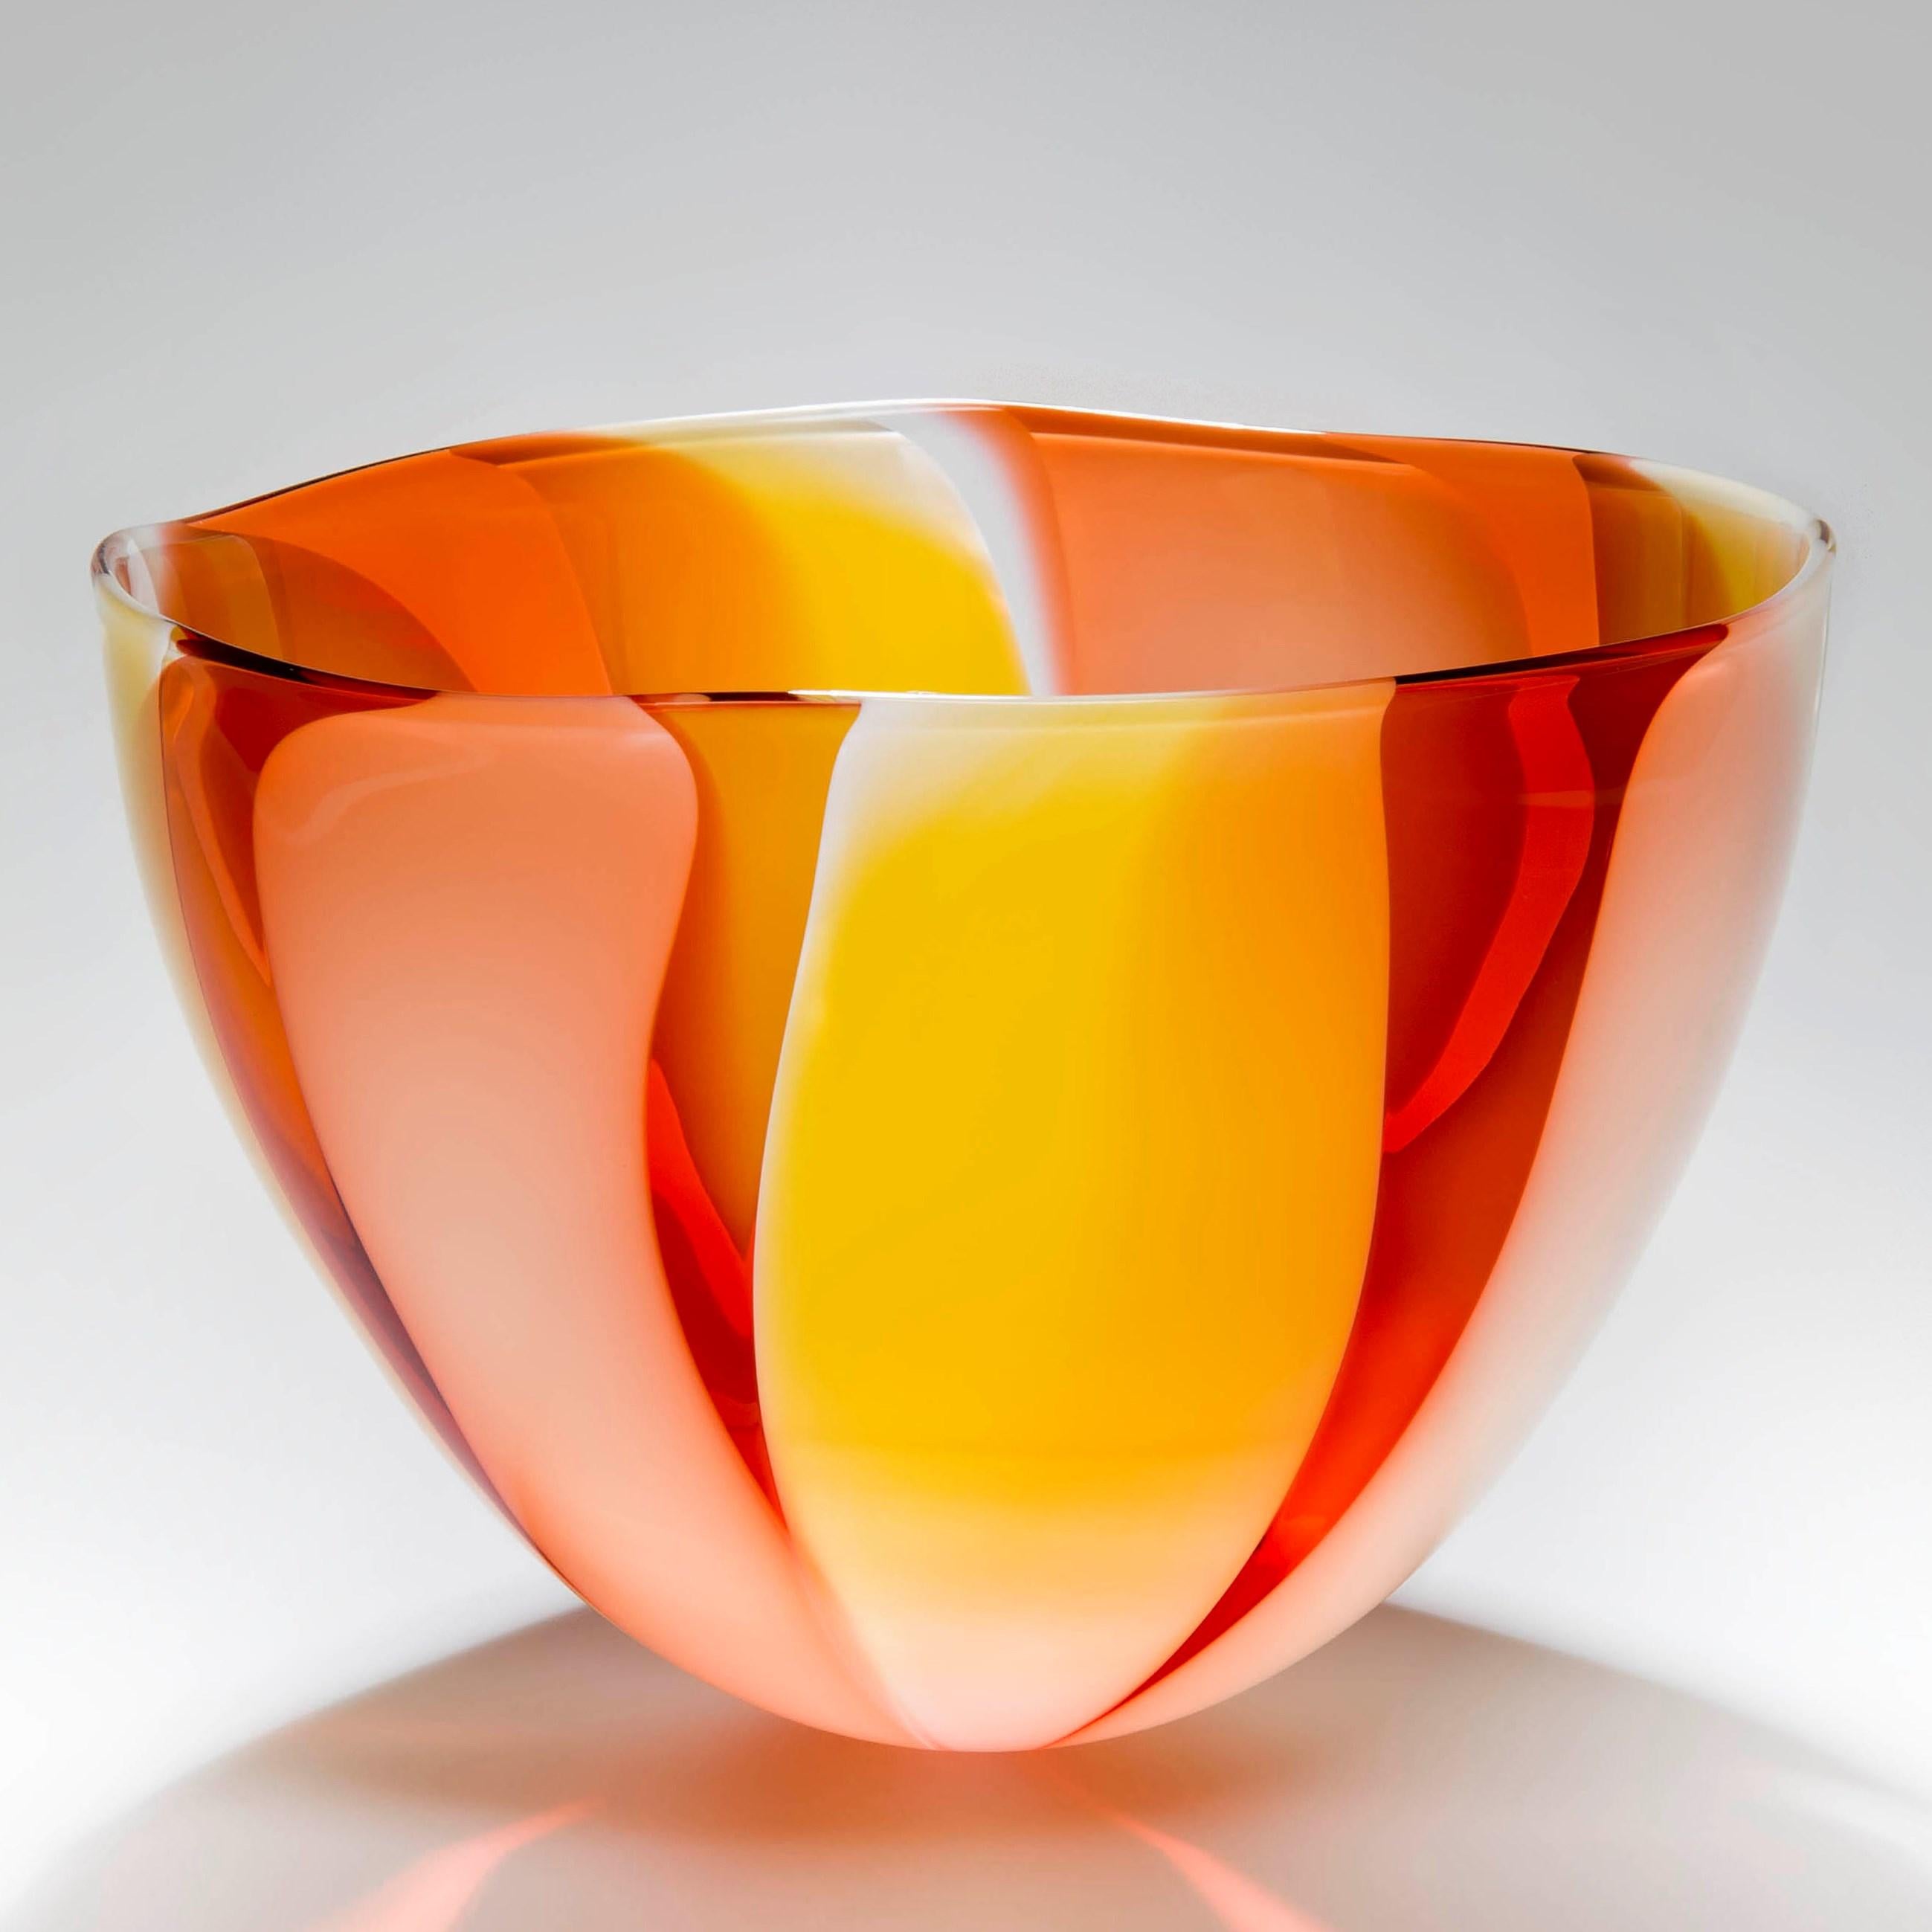 'Waves No 245' is a beautifully crafted, handblown glass bowl by the British artist, Neil Wilkin.

Taking a painterly approach, Neil Wilkin merges his colours to create a larger palette of soft hues. Utilising both transparent and opaque glass adds